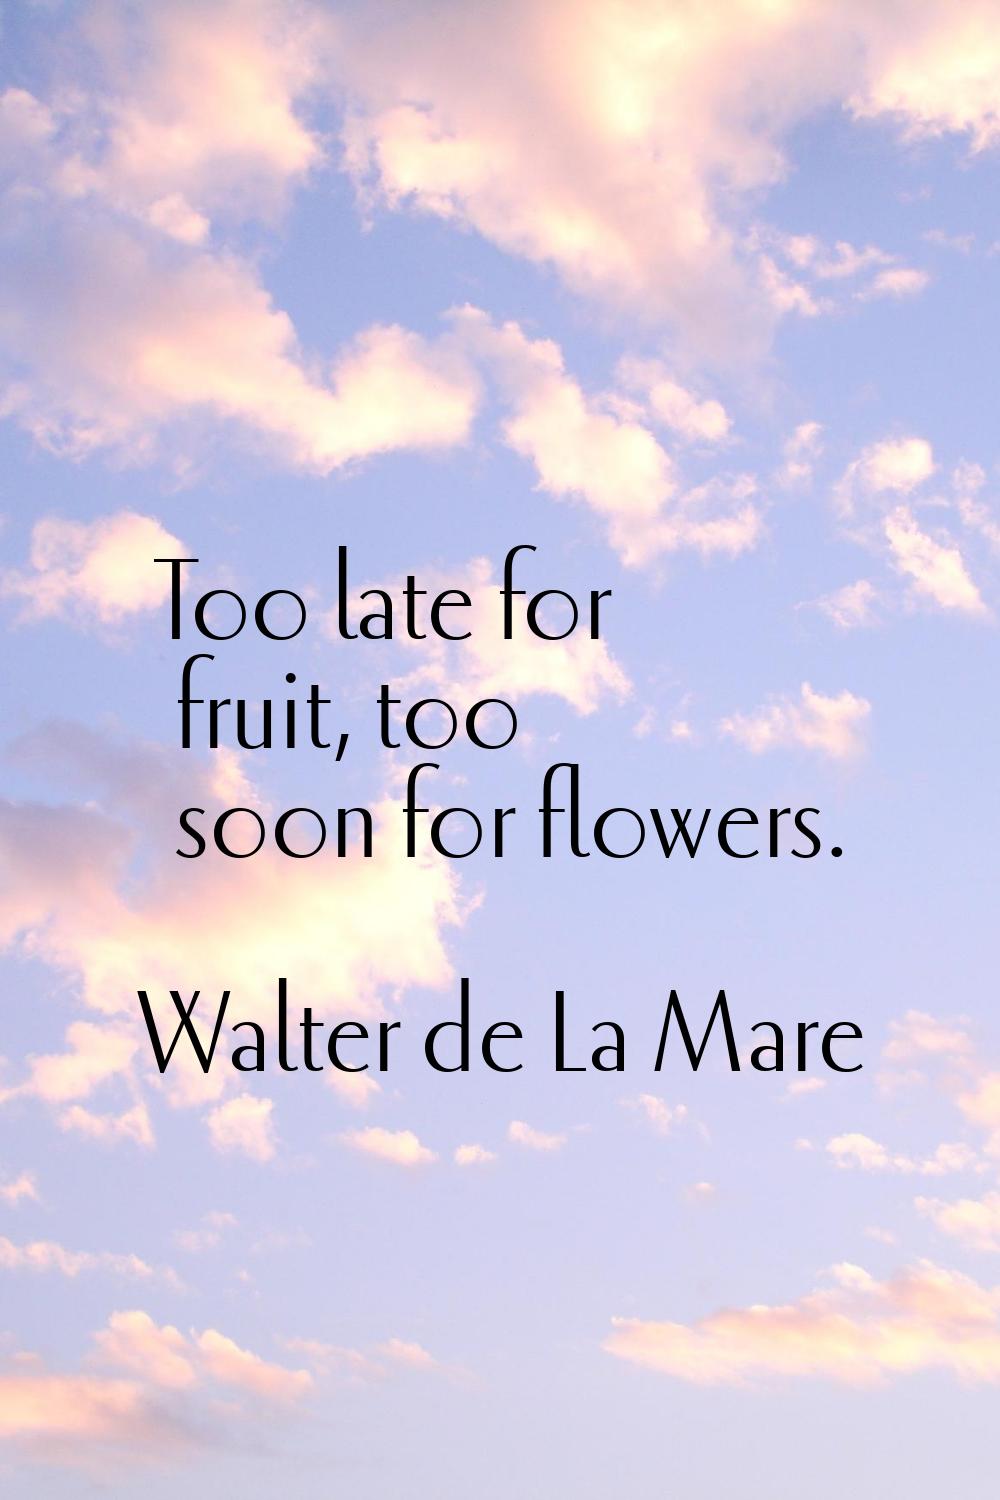 Too late for fruit, too soon for flowers.